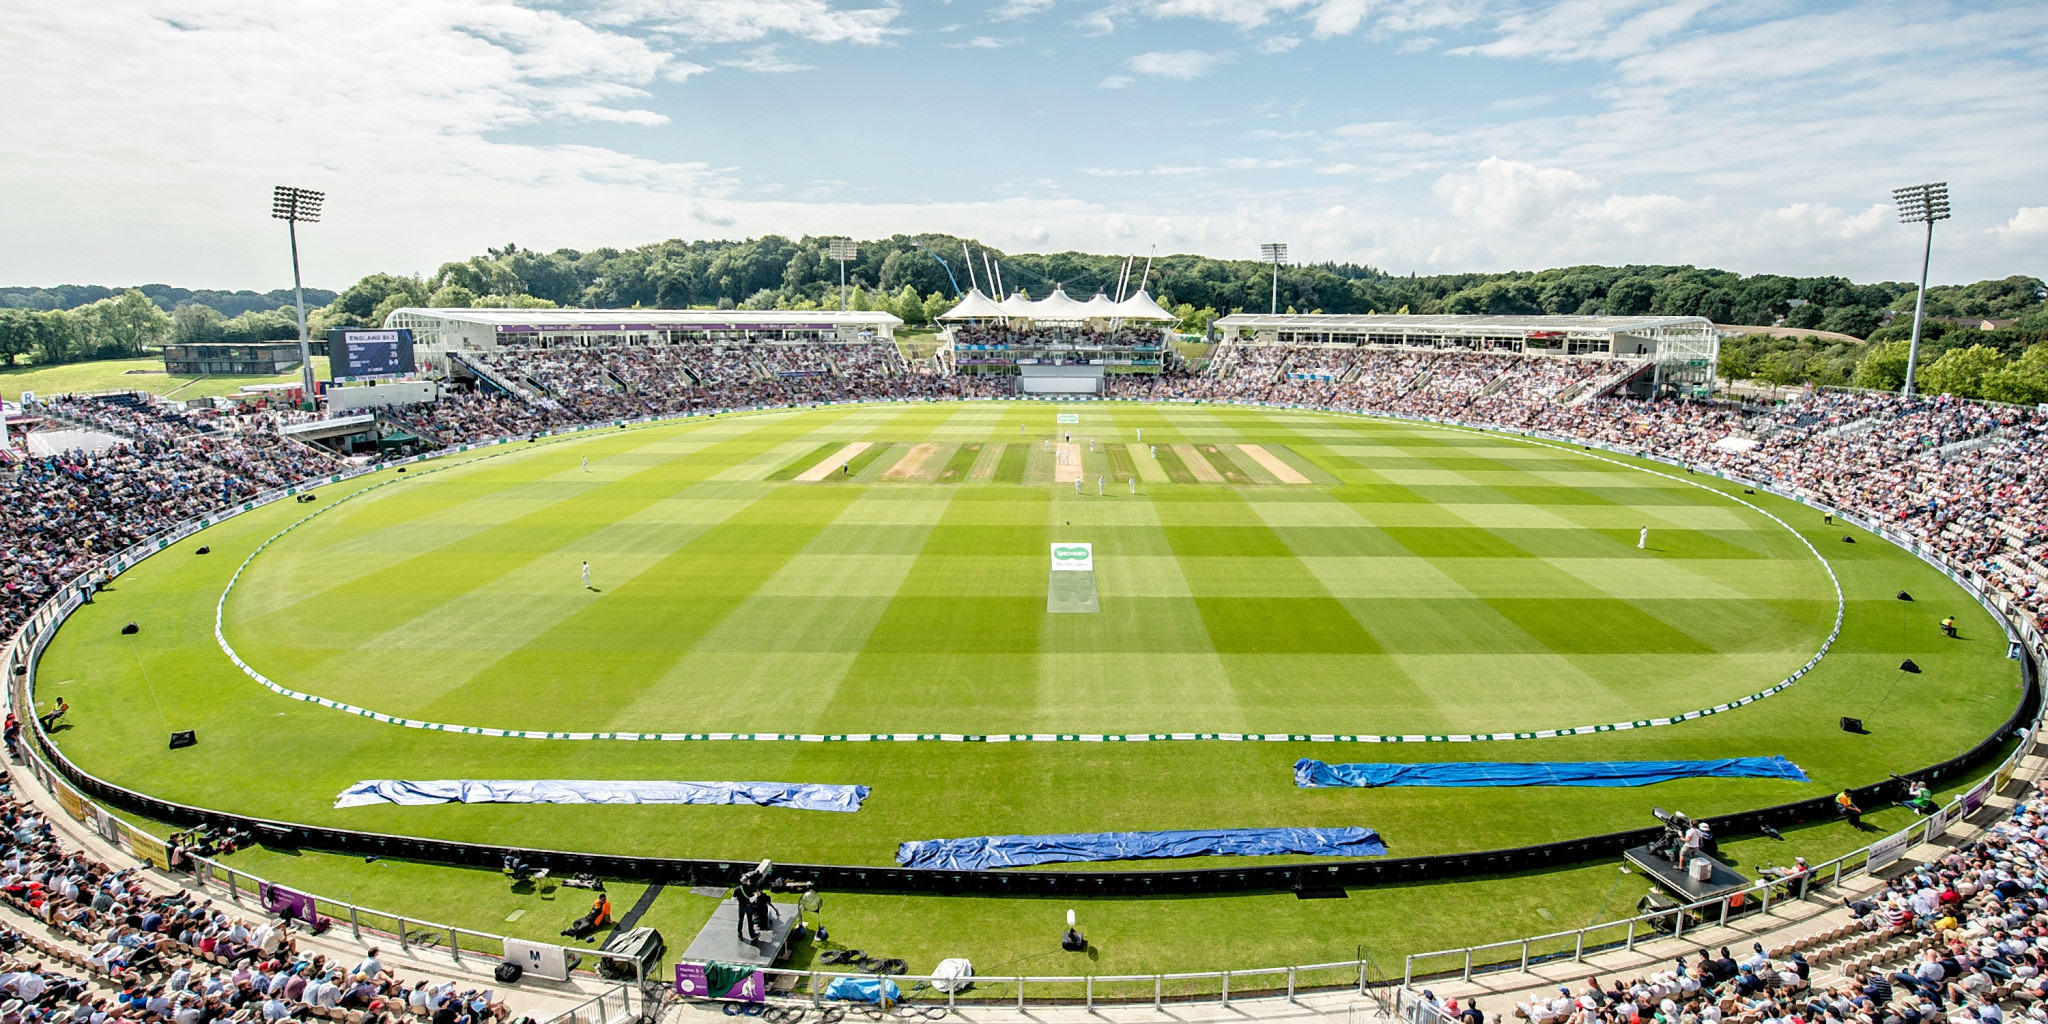 The Ageas Bowl in Southampton has been chosen to host the  inaugural men’s World Test Cricket Championship final ©Getty Images